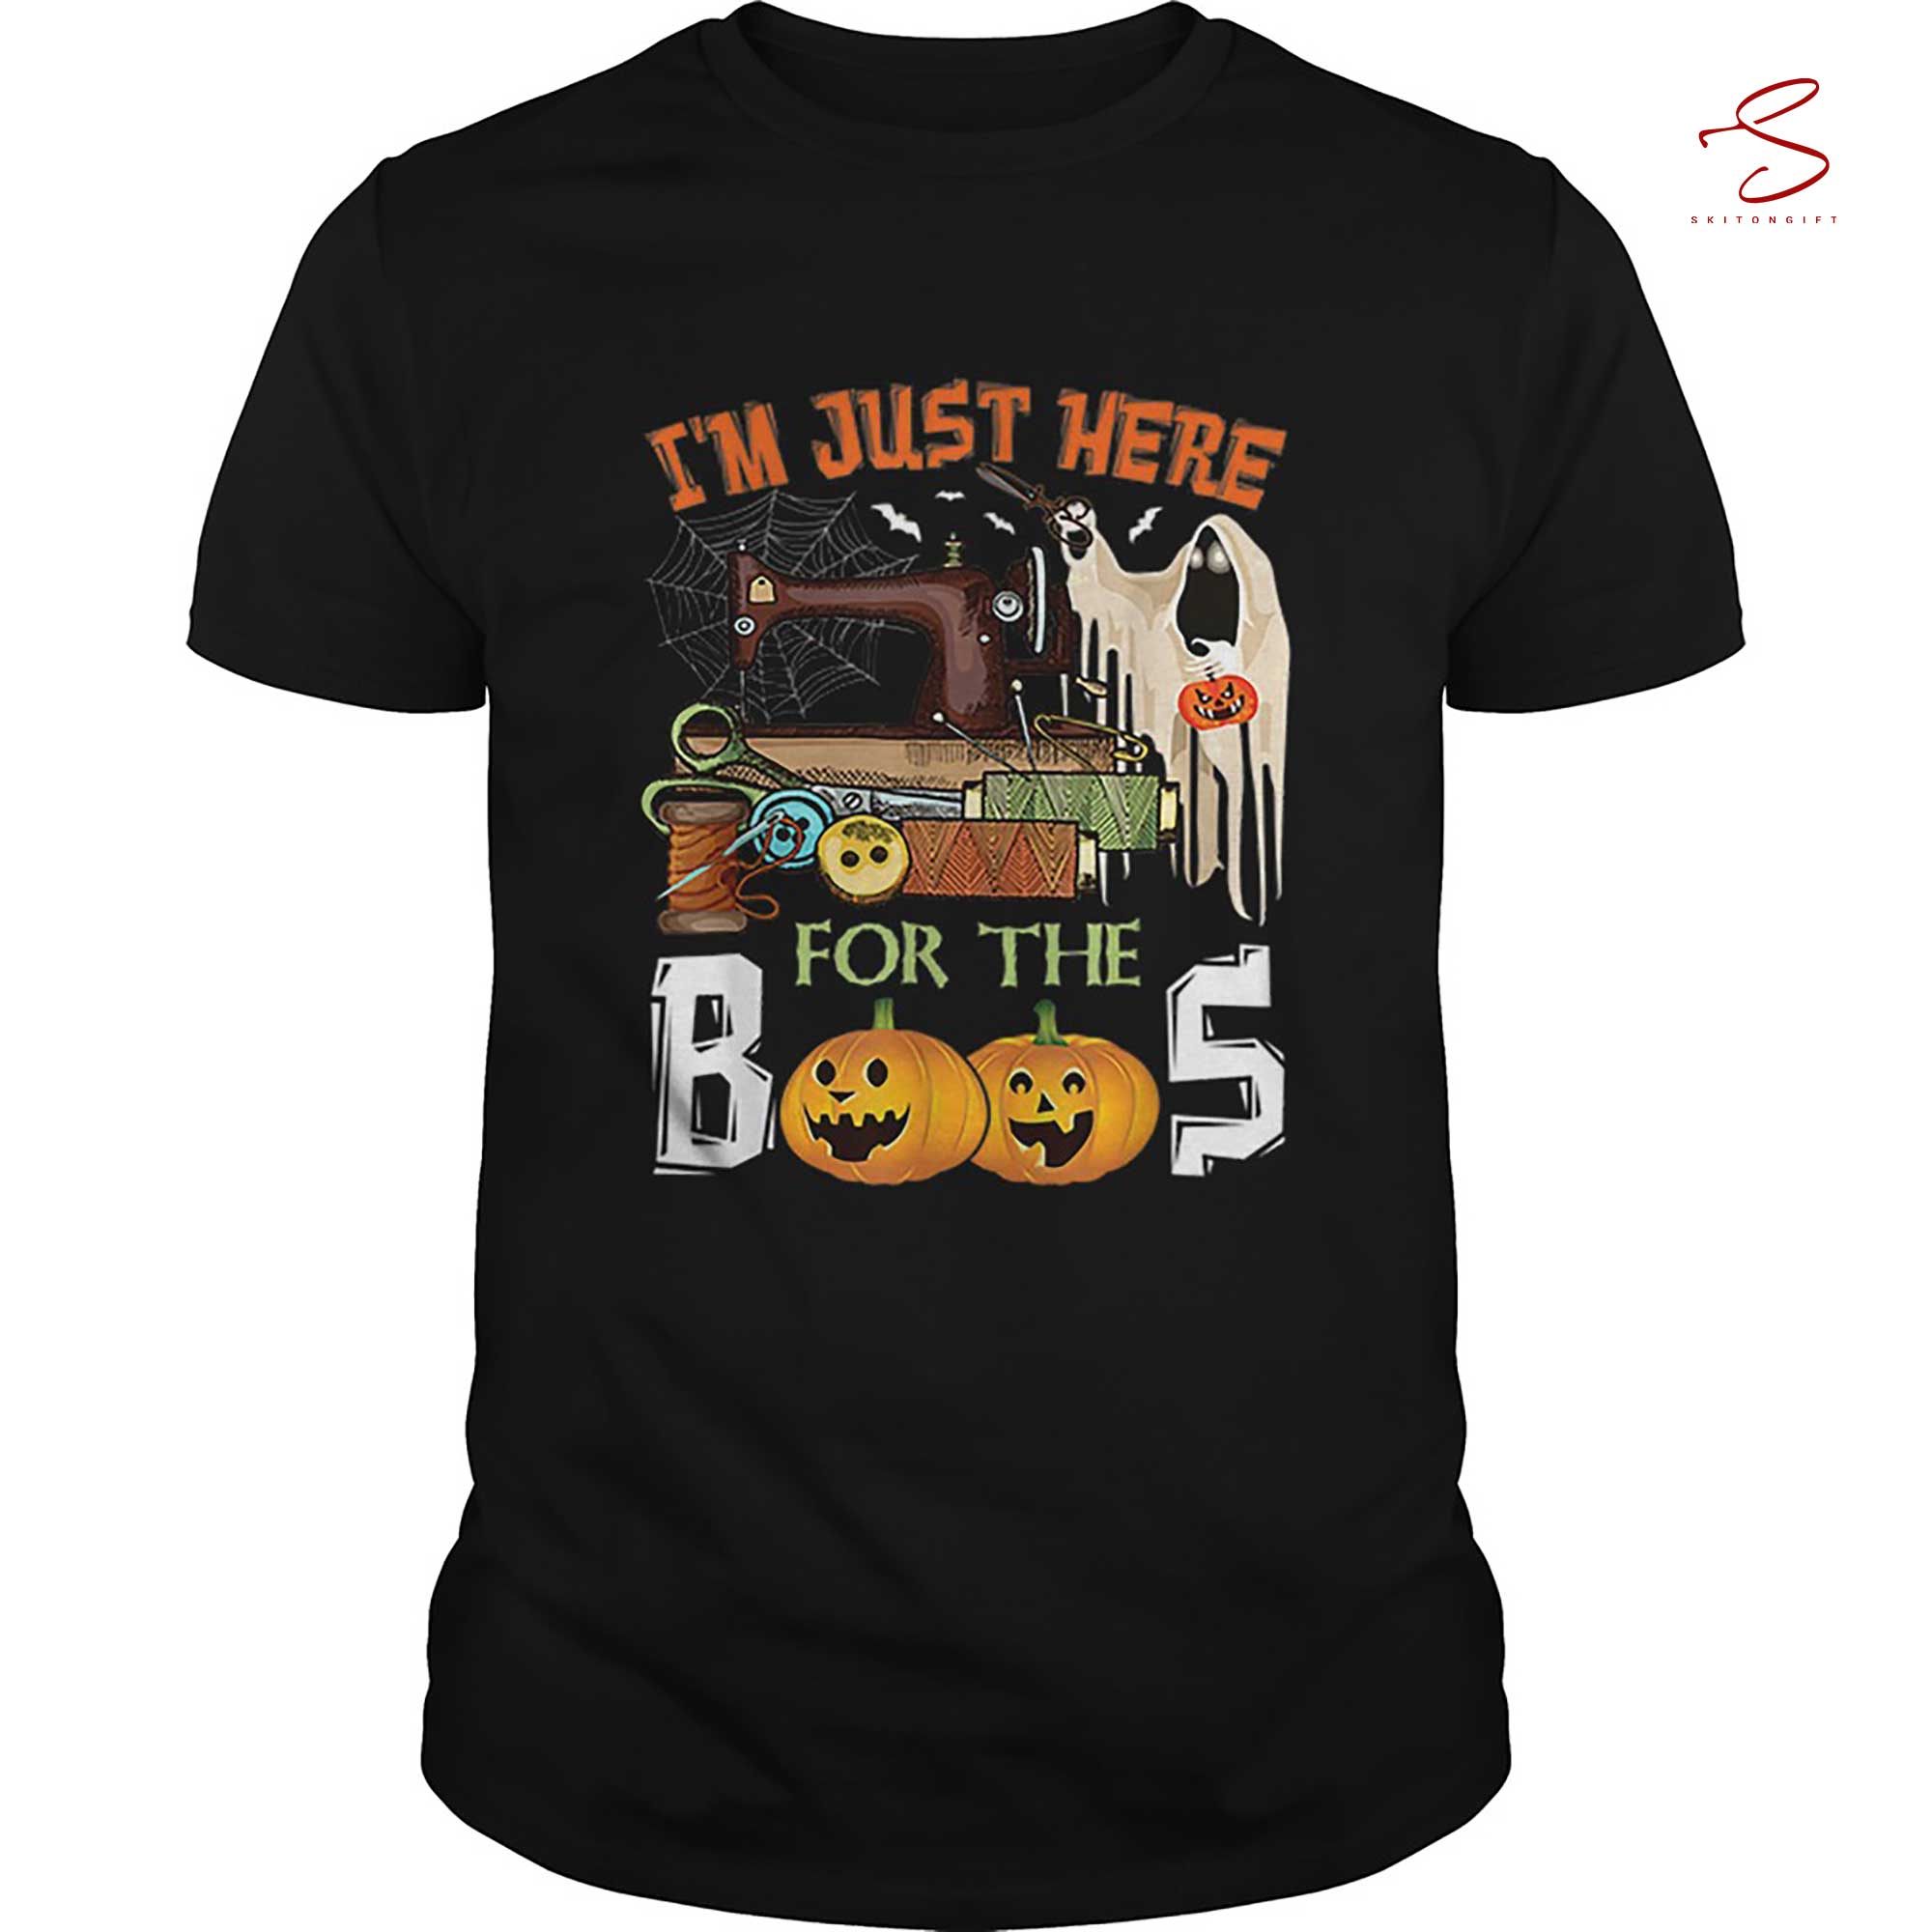 Skitongift I'm Just Here For The Boos Halloween Quilting T Shirt